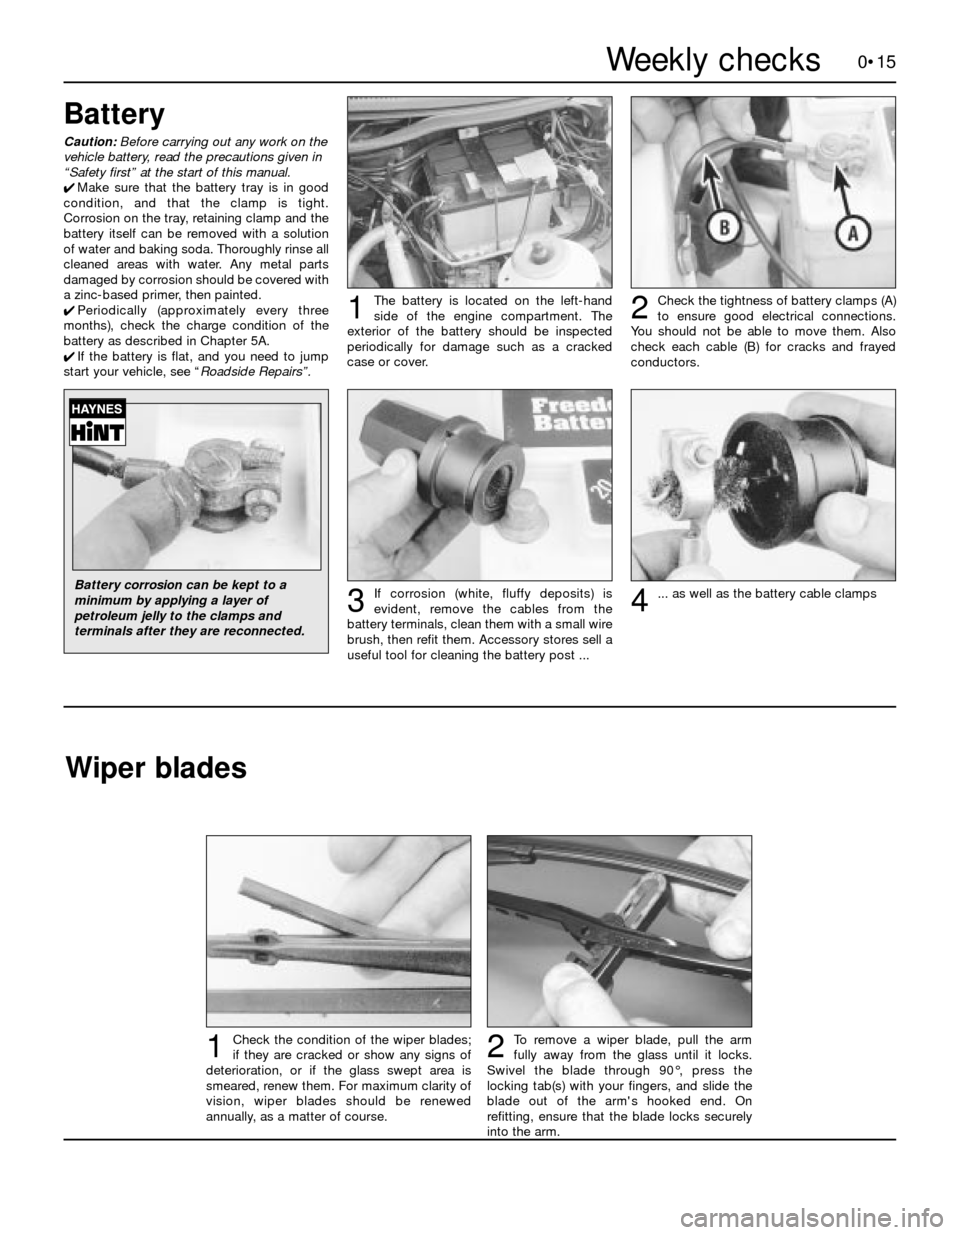 FORD SIERRA 1982 1.G Introduction User Guide 0•15
To remove a wiper blade, pull the arm
fully away from the glass until it locks.
Swivel the blade through 90°, press the
locking tab(s) with your fingers, and slide the
blade out of the arms h